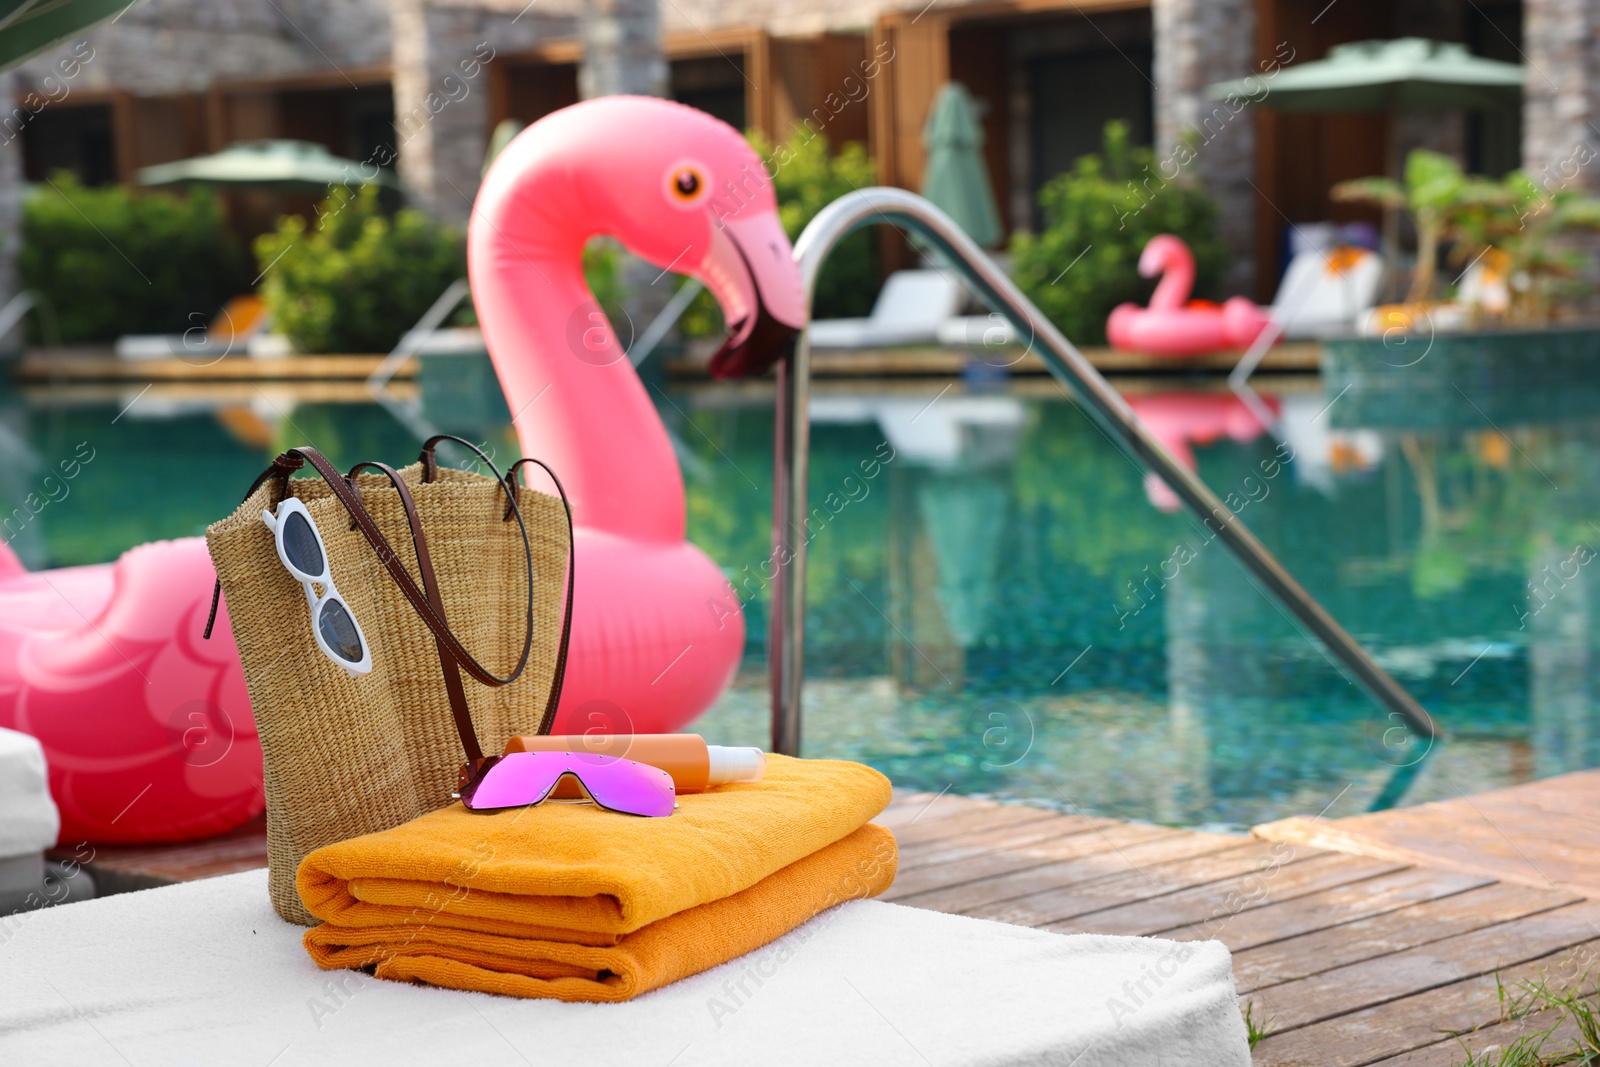 Photo of Beach accessories on sun lounger and float in shape of flamingo near outdoor swimming pool, space for text. Luxury resort